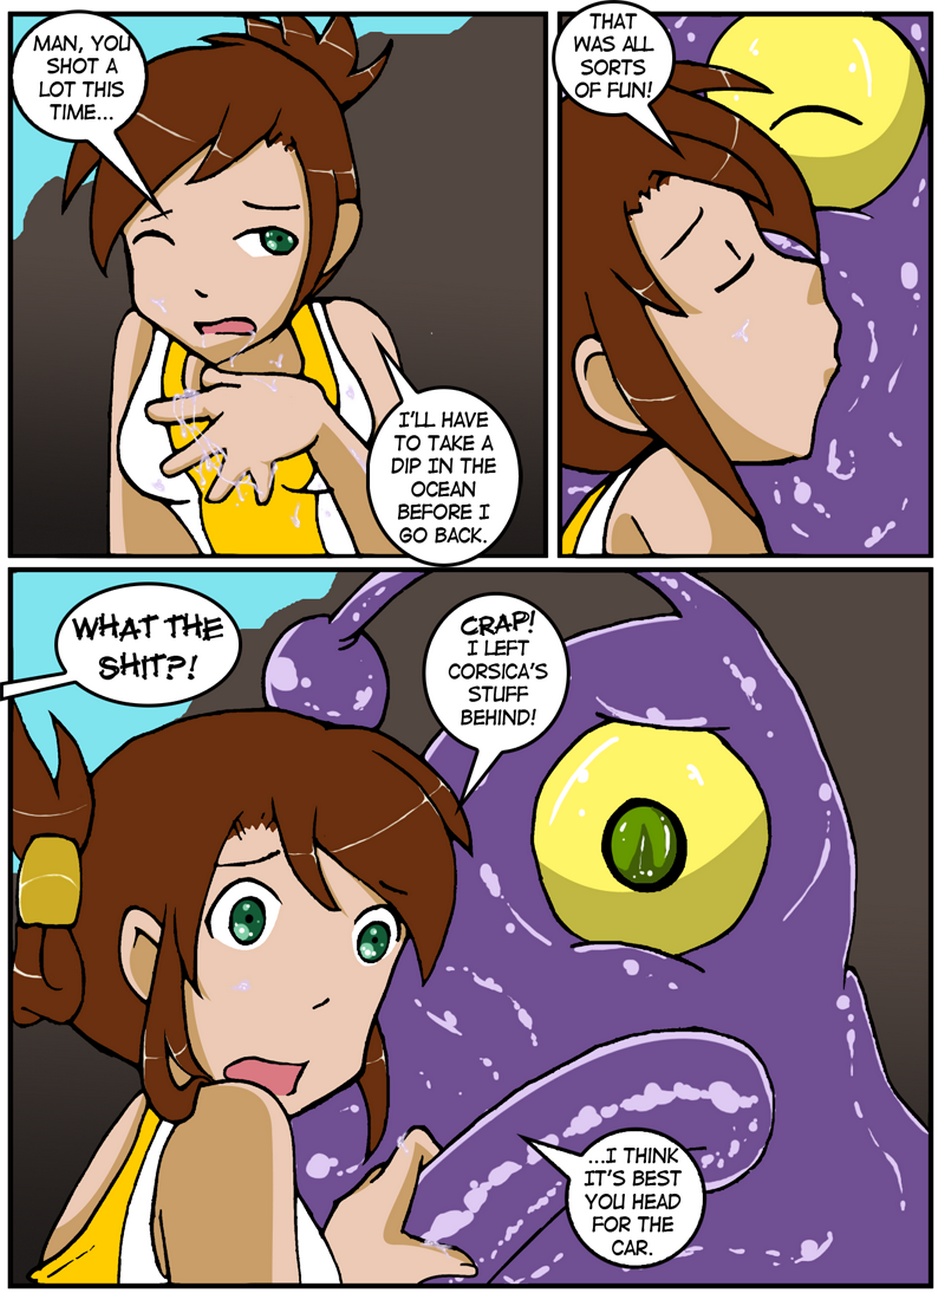 A Date With A Tentacle Monster 2 - Tentach